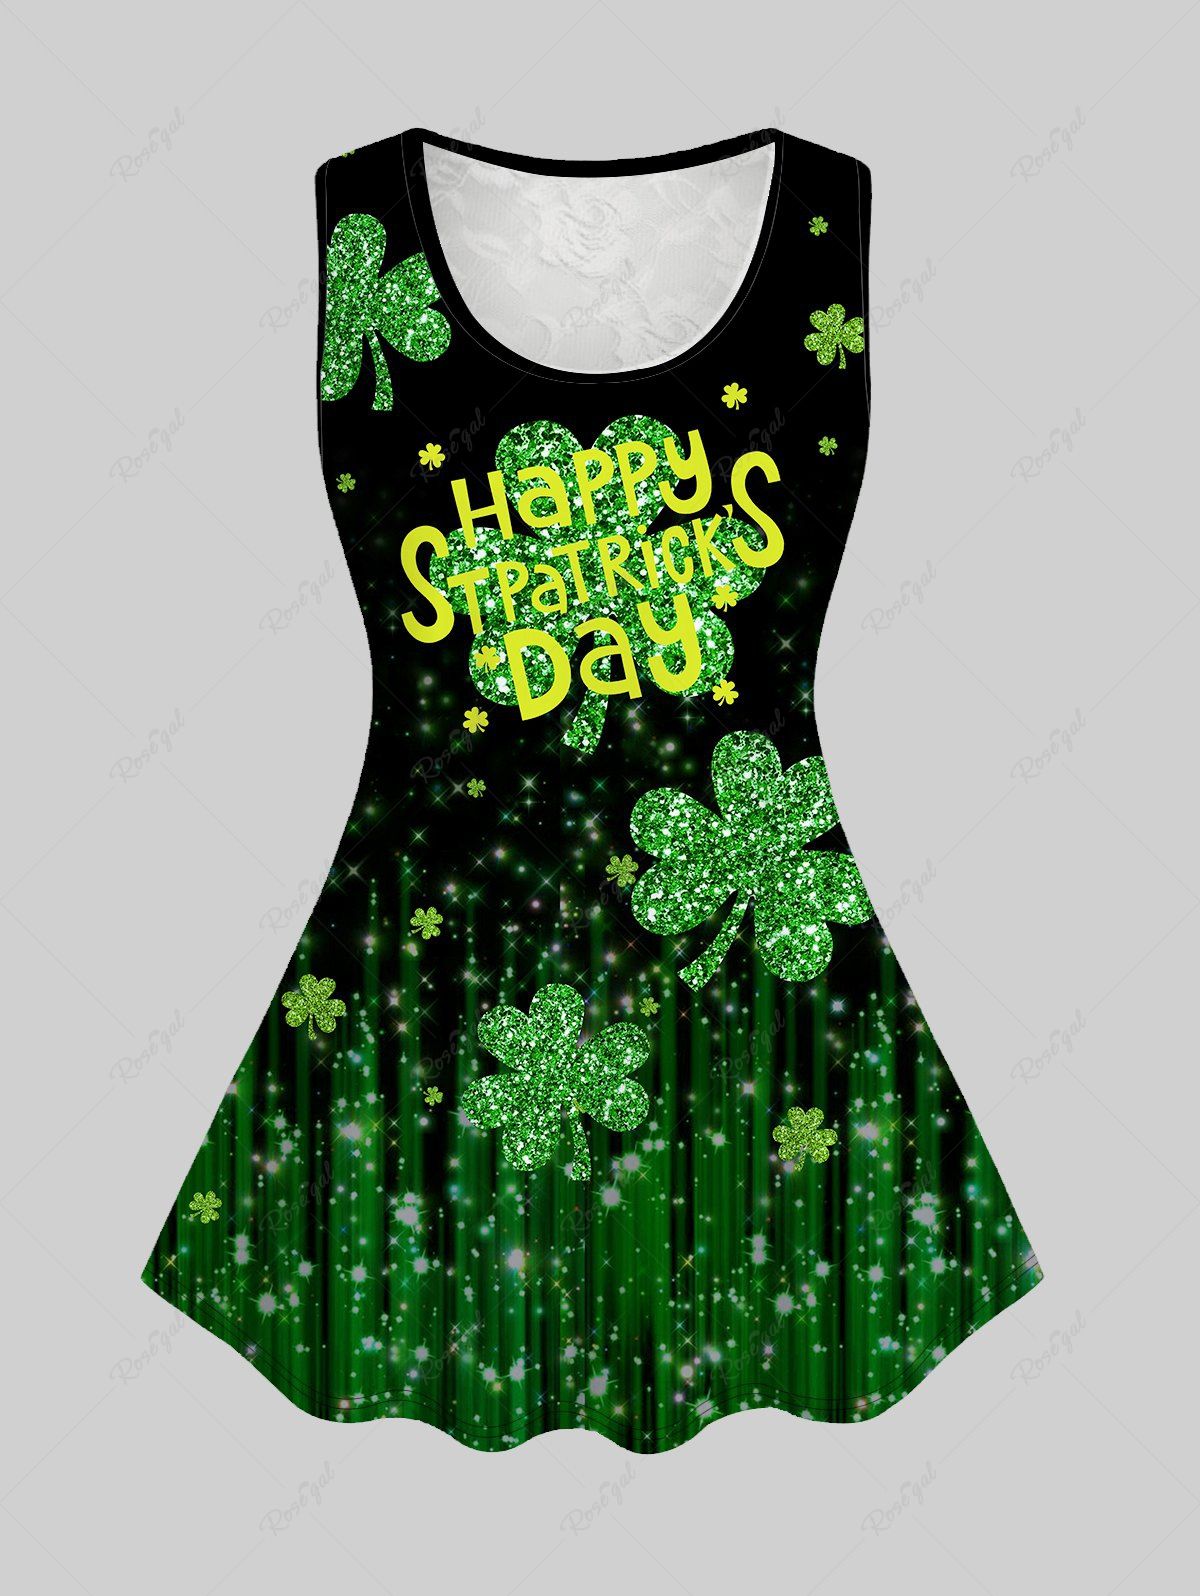 Discount Plus Size St Patrick's Day Clovers Printed Lace Panel Graphic Top  